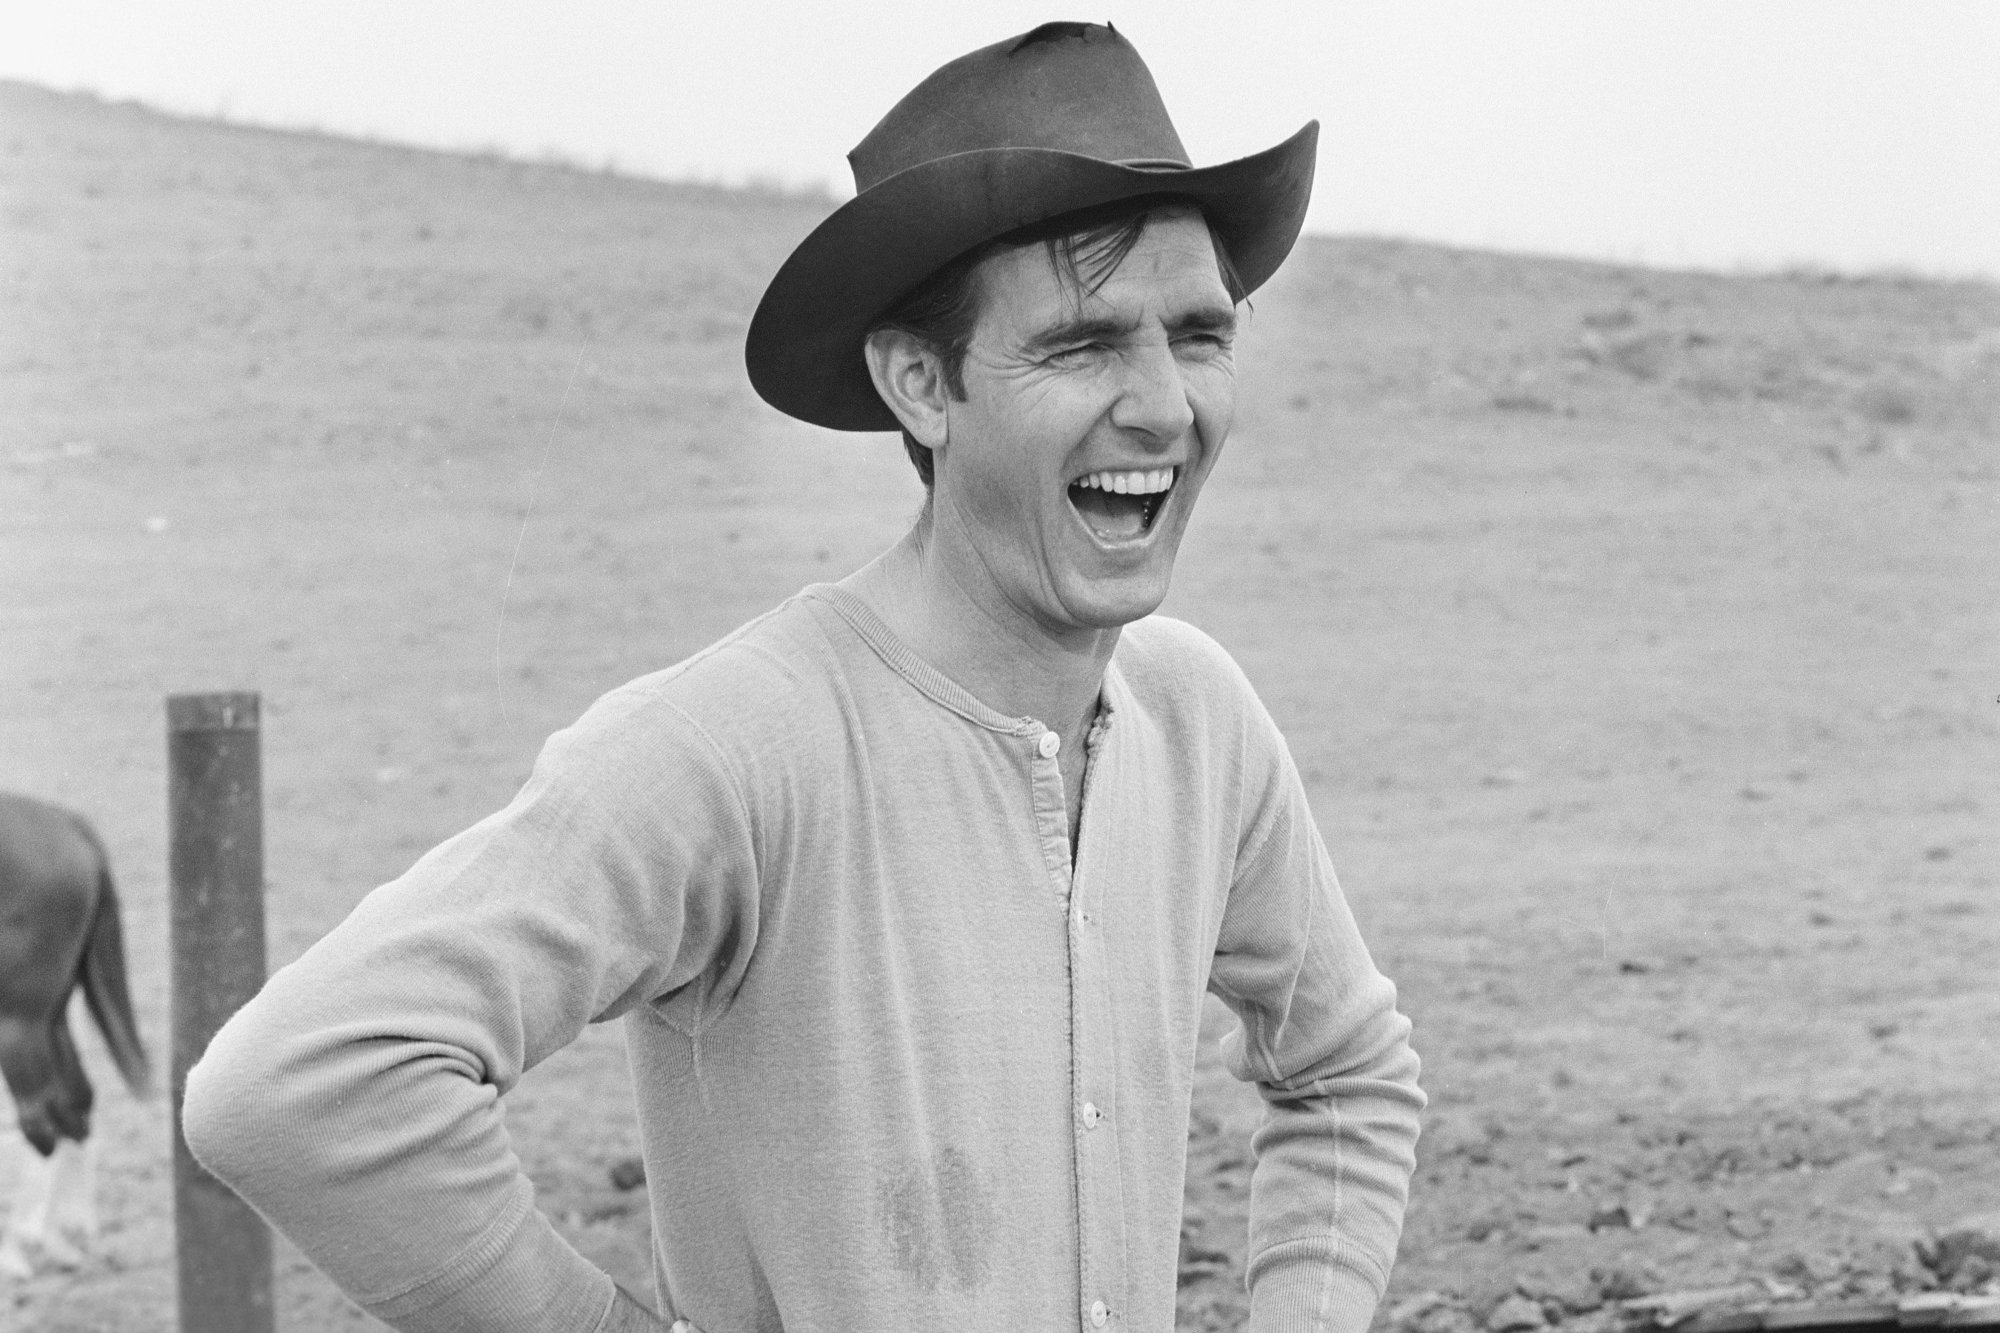 'Gunsmoke' Dennis Weaver as Chester Goode with his hands on his hips, laughing. He's wearing a cowboy hat.